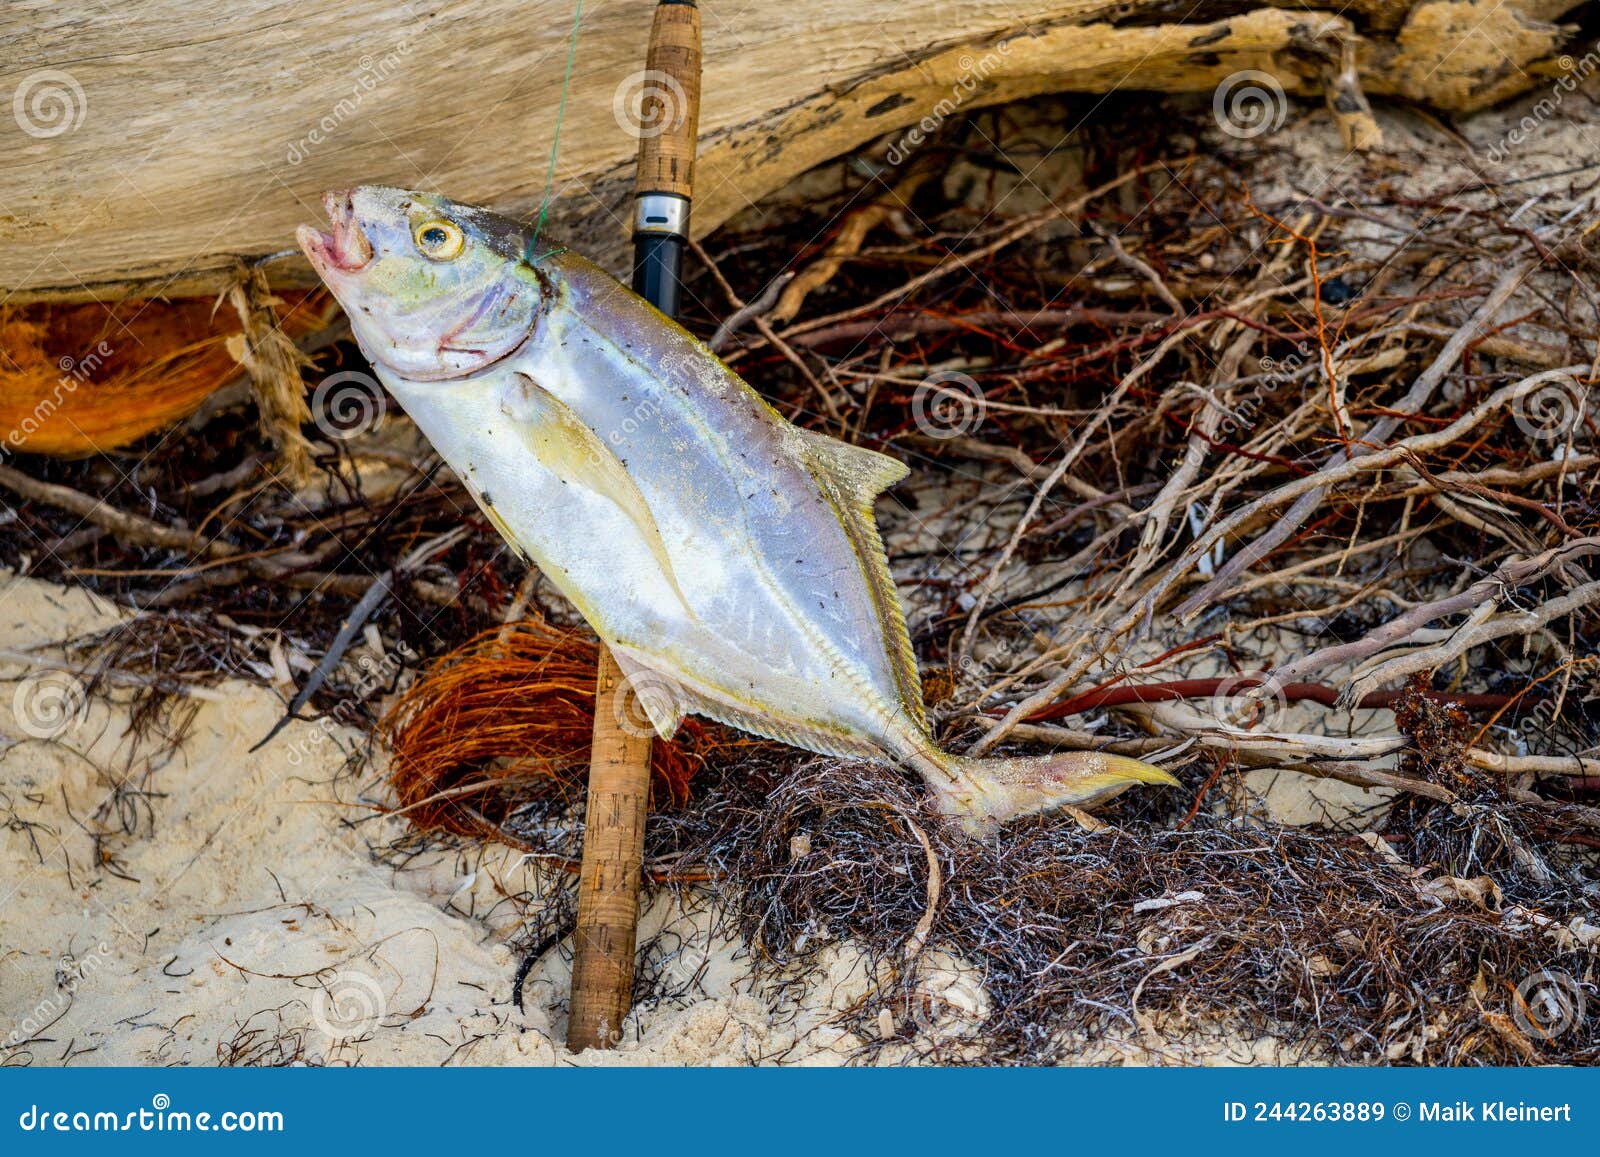 Silver Fish on Beach Aside Robe Stock Image - Image of seafood